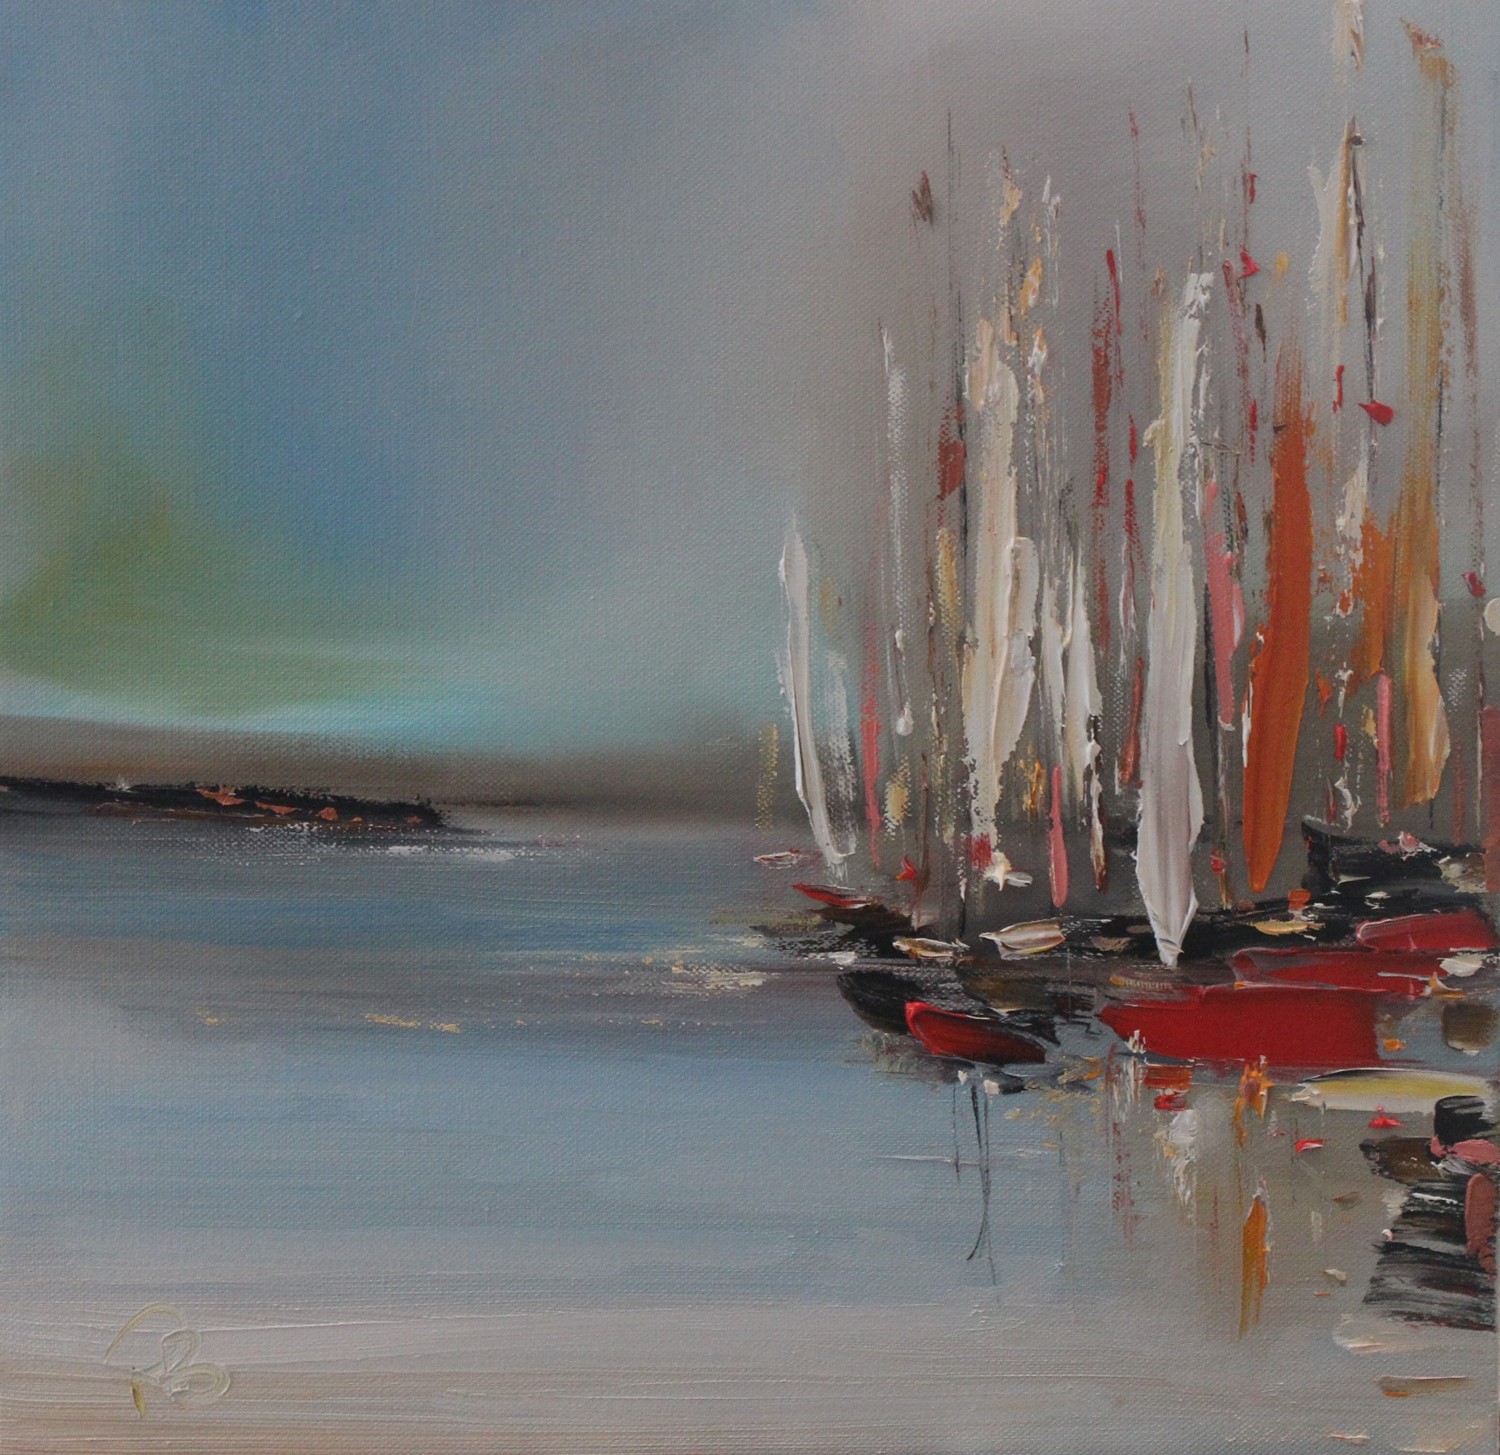 'A Crowd of Boats' by artist Rosanne Barr